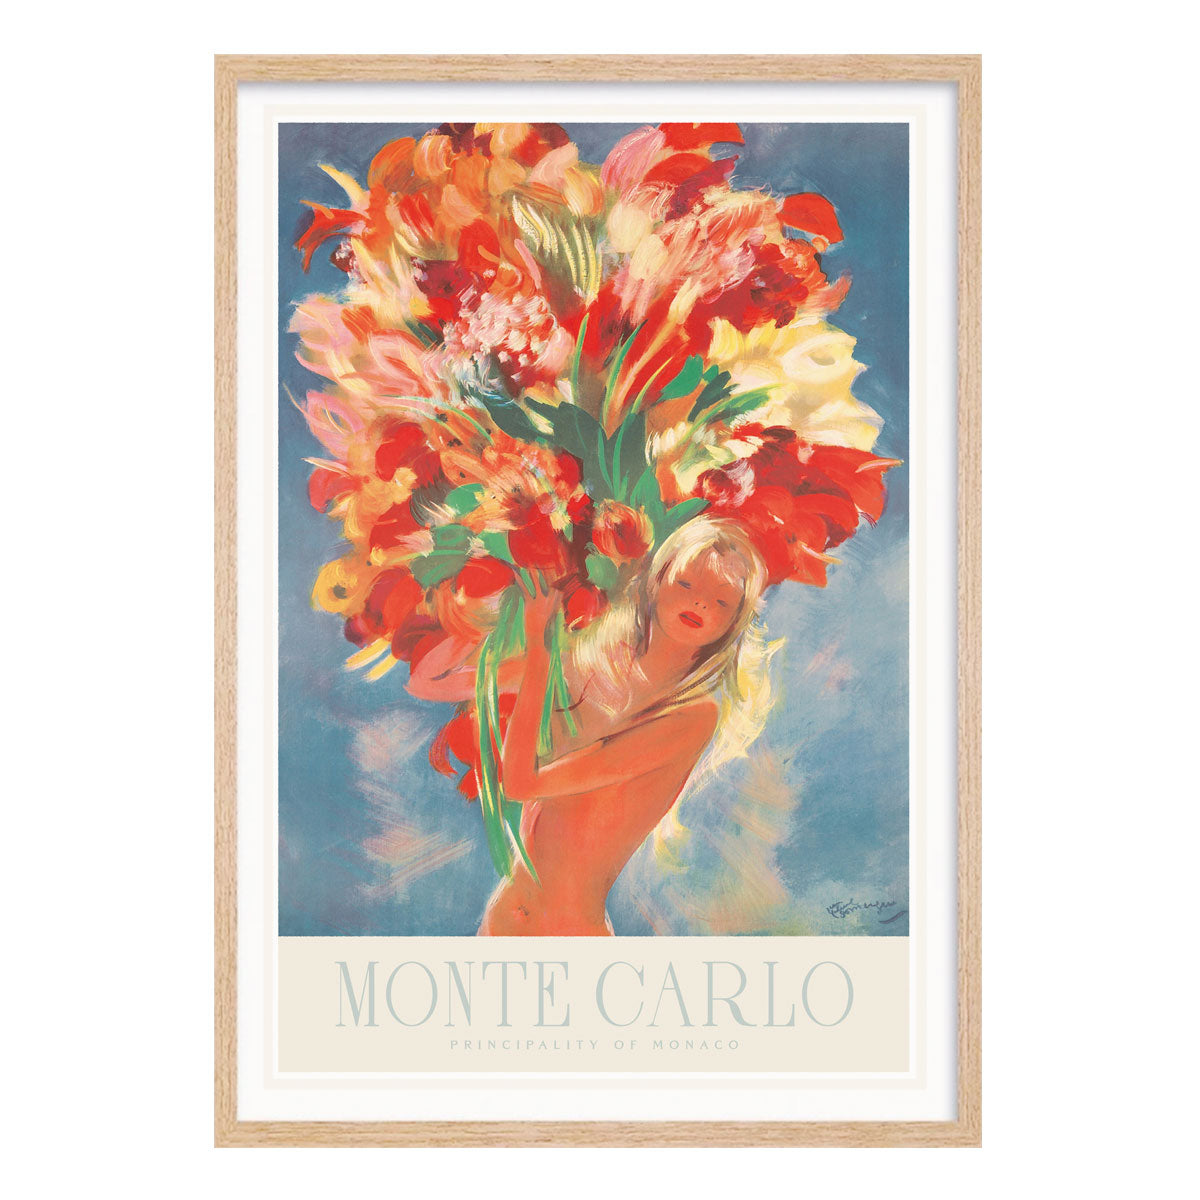 Monte Carlo Flowers retro vintage travel poster print in oak frame from Places We Luv